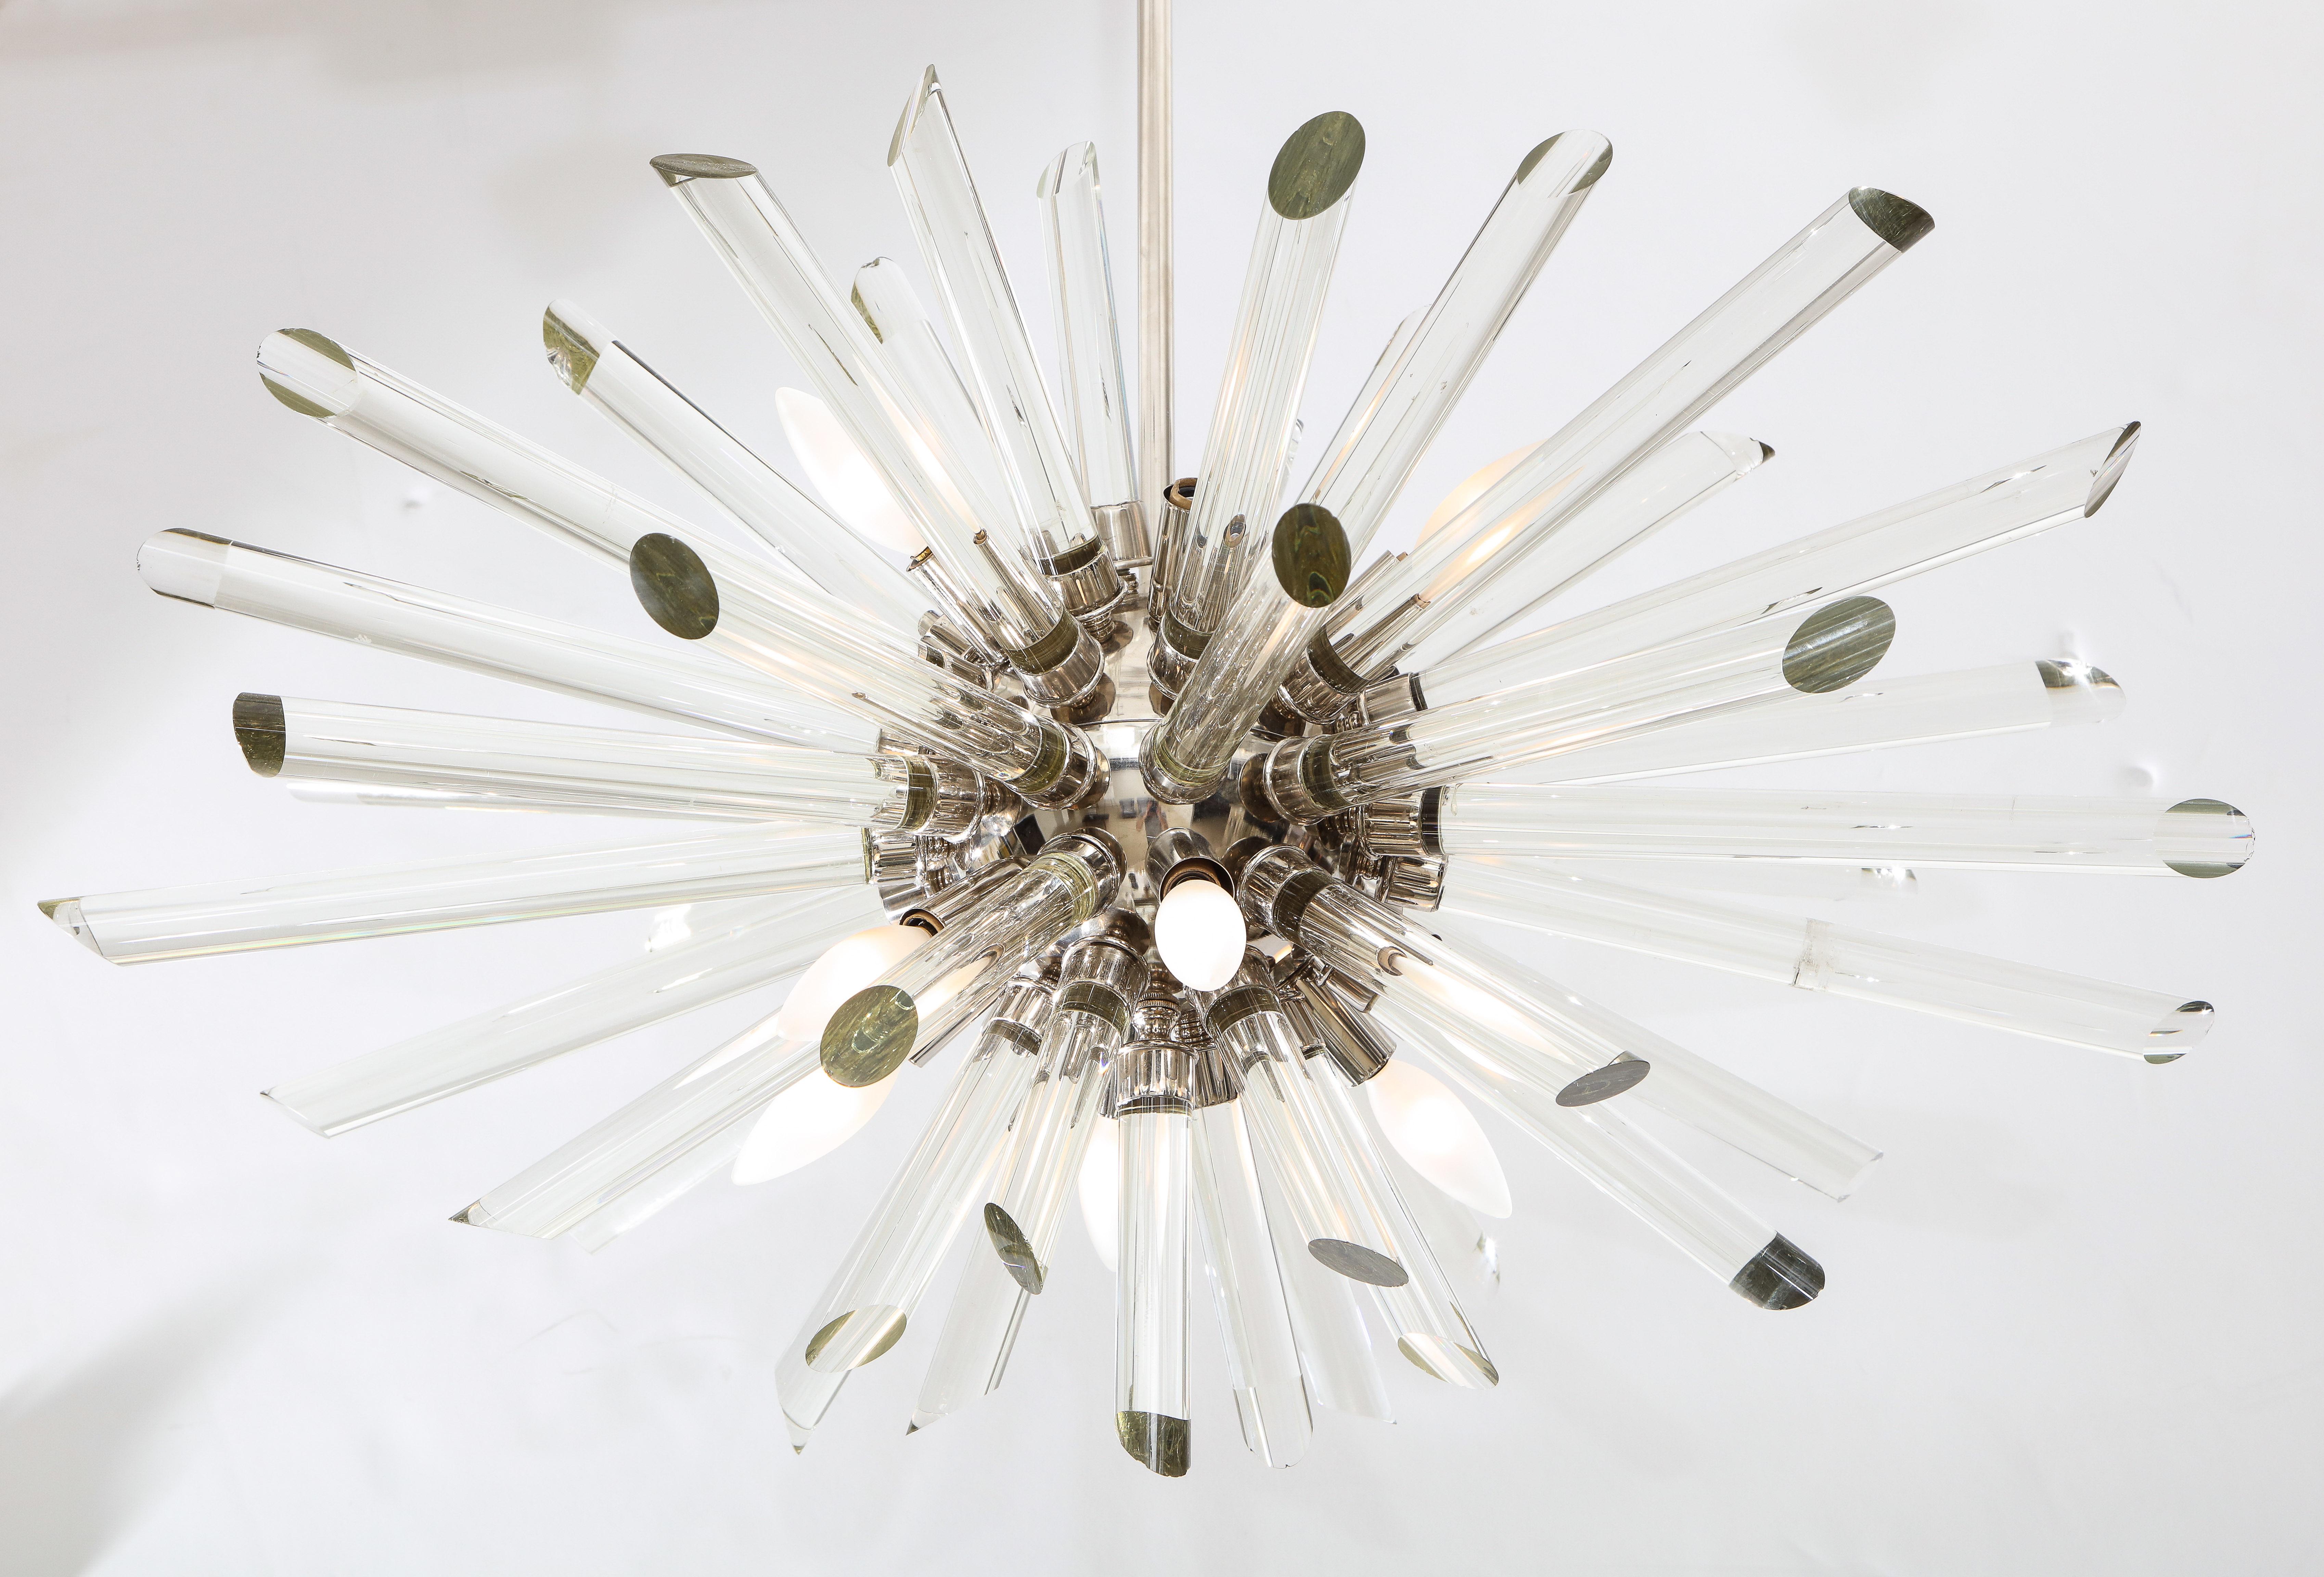 A ten light Sputnik chandelier with numerous glass rods hangs from a nickel-plated central pole that can be adjusted to ceiling height.